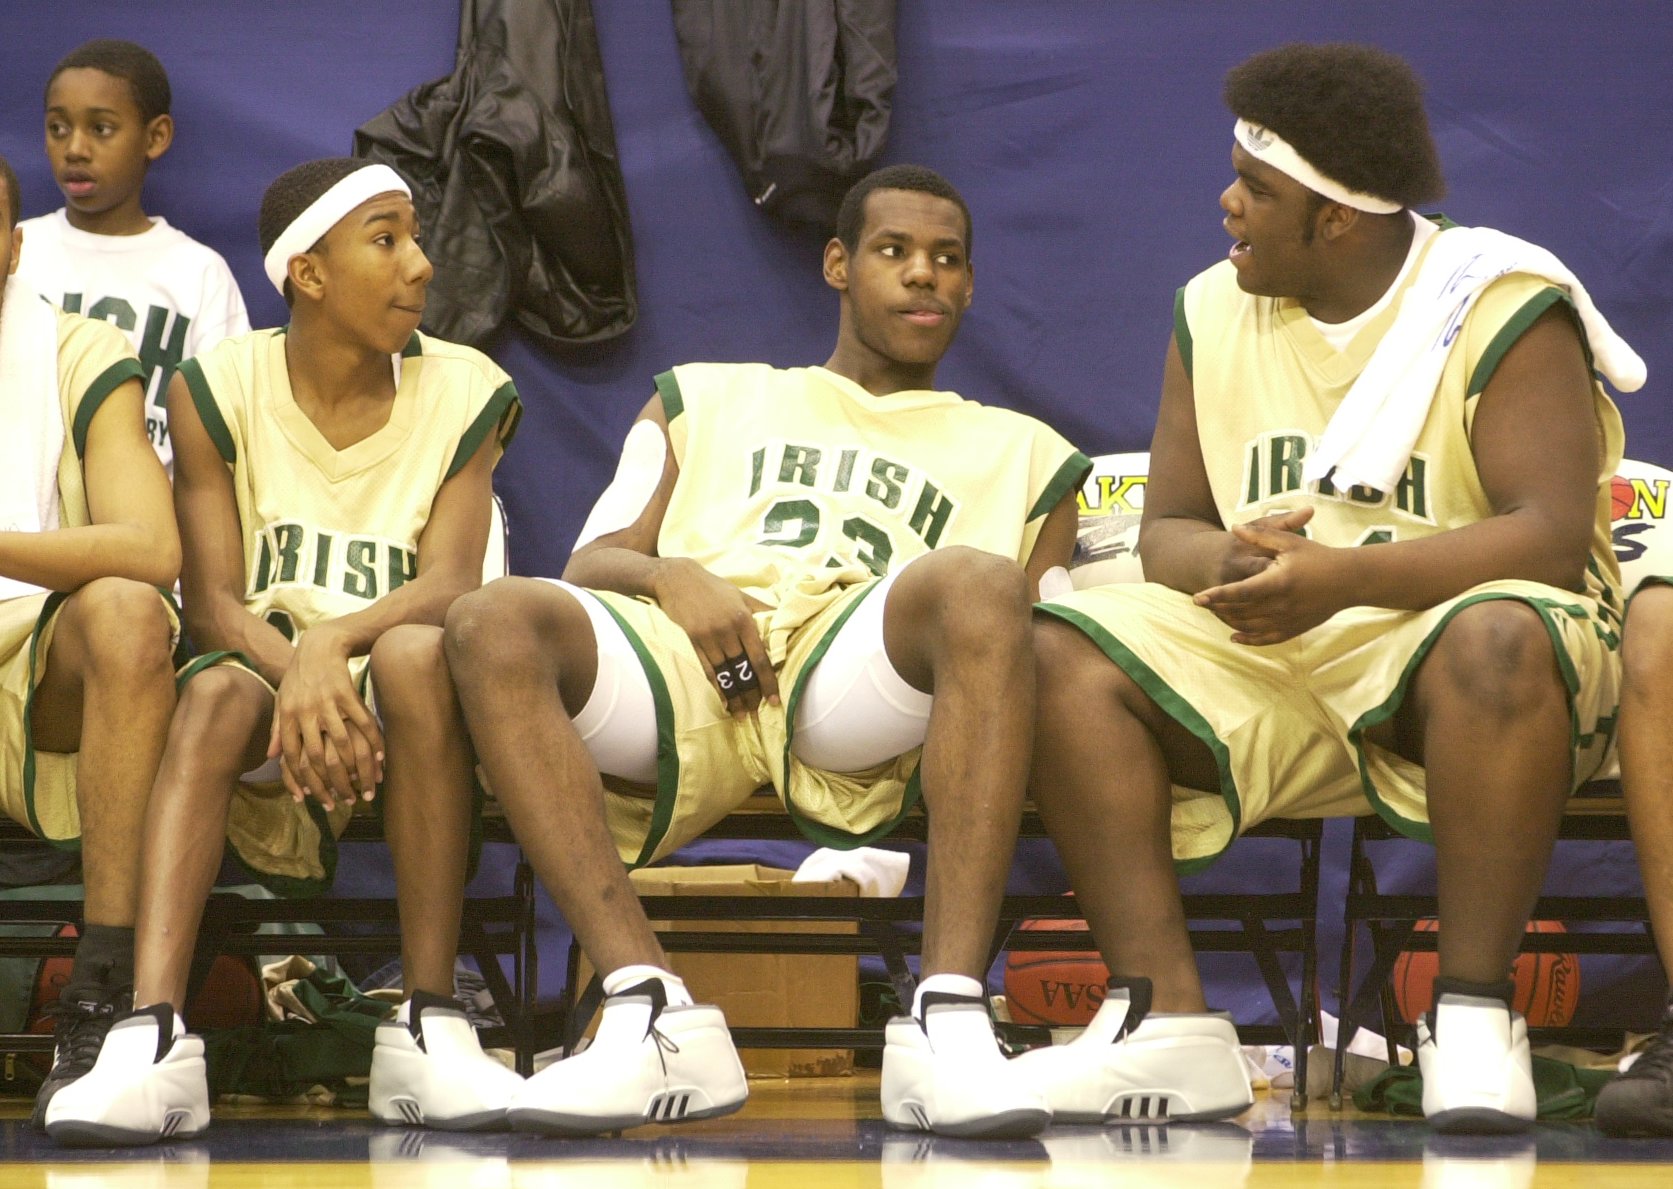 LeBron James sandwiched by two of his best friends, Dru Joyce Jr, left, and Sian Cotton, right.  They were benched as the game against Franklin PA wound to a close last Friday night at the JAR.  Friday January 11, 2002 (bill kennedy/plain dealer)